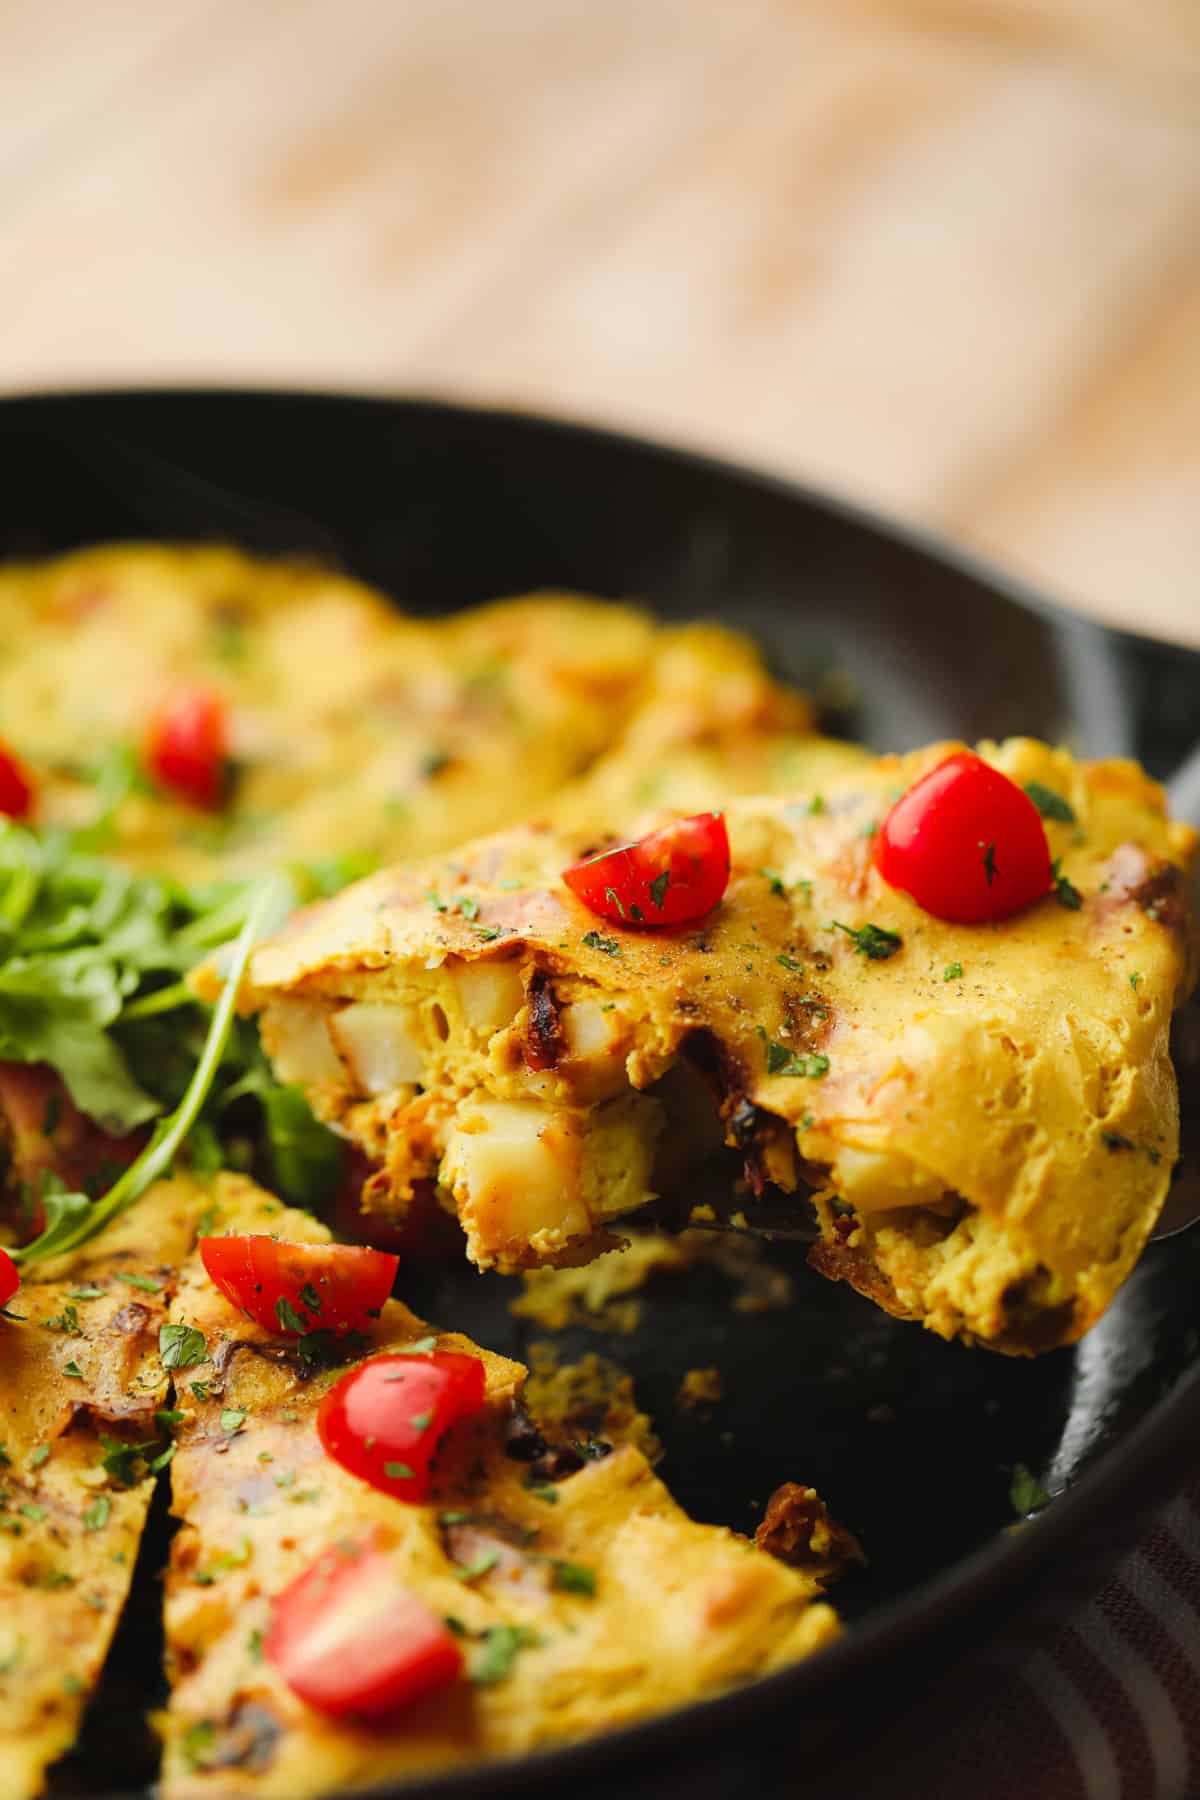 lifting a slice of vegan frittata topped with sliced cherry tomatoes from a black skillet.